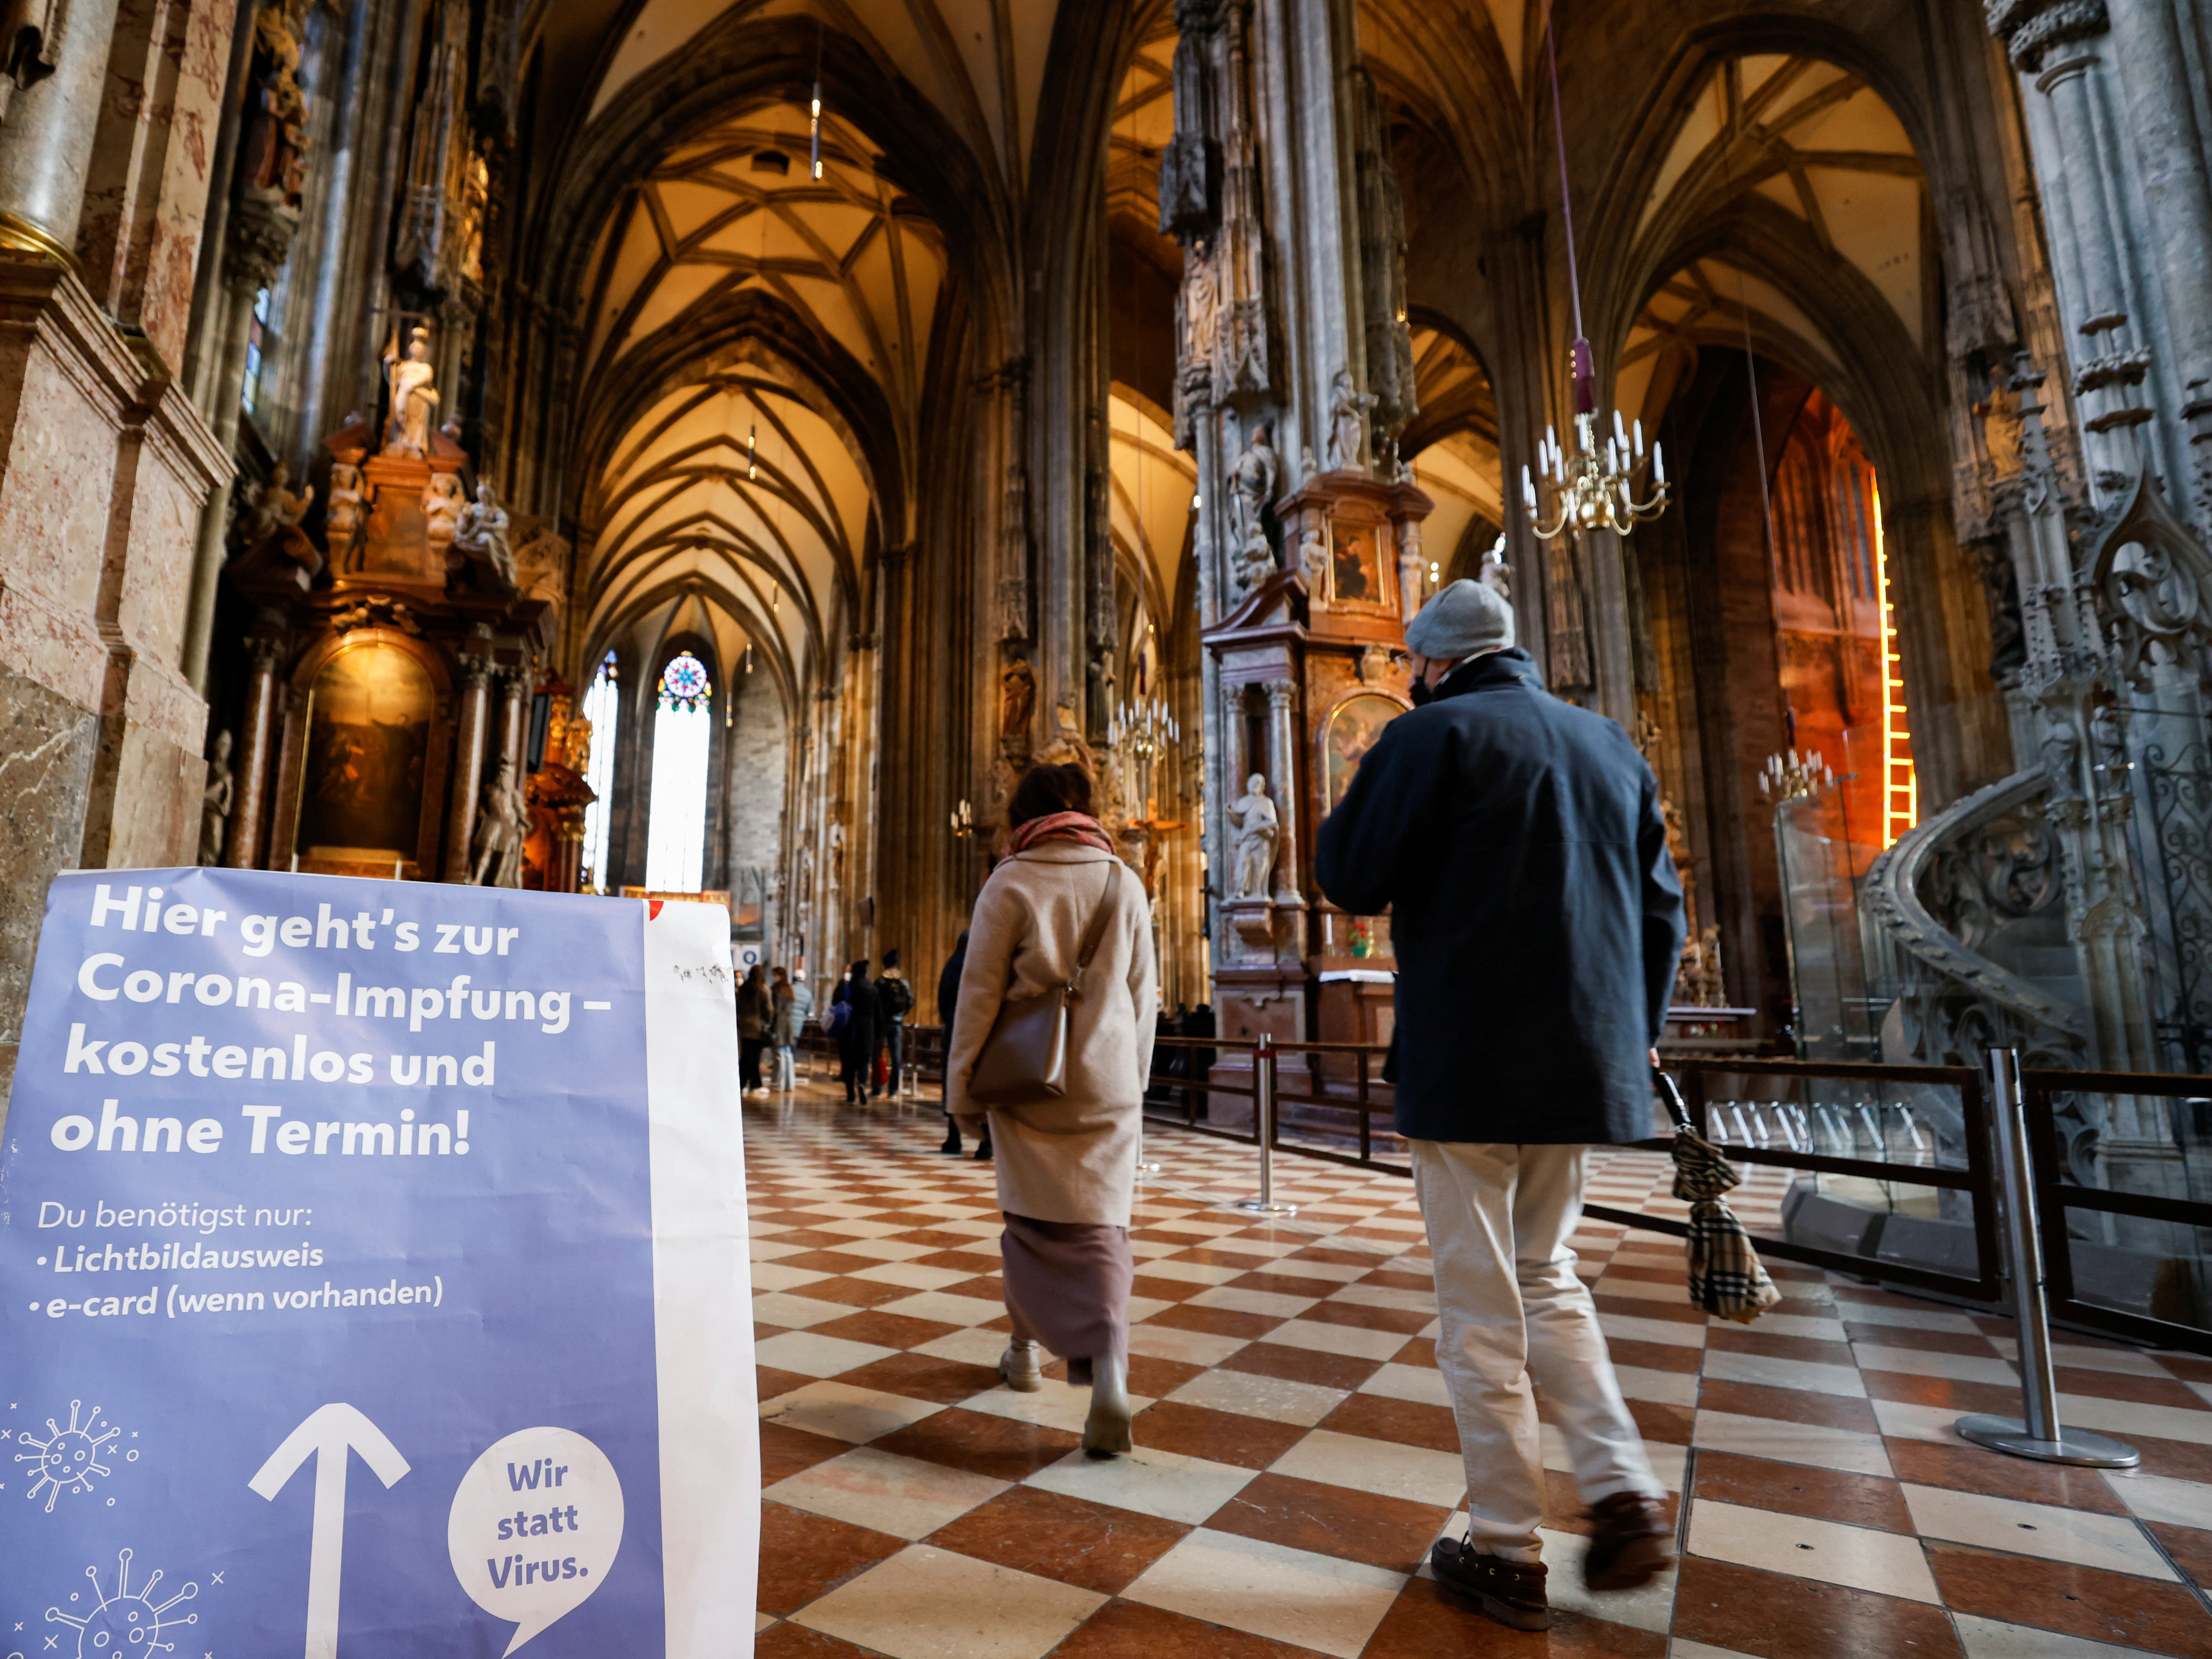 Vaccination center in St. Stephen's Cathedral in Vienna